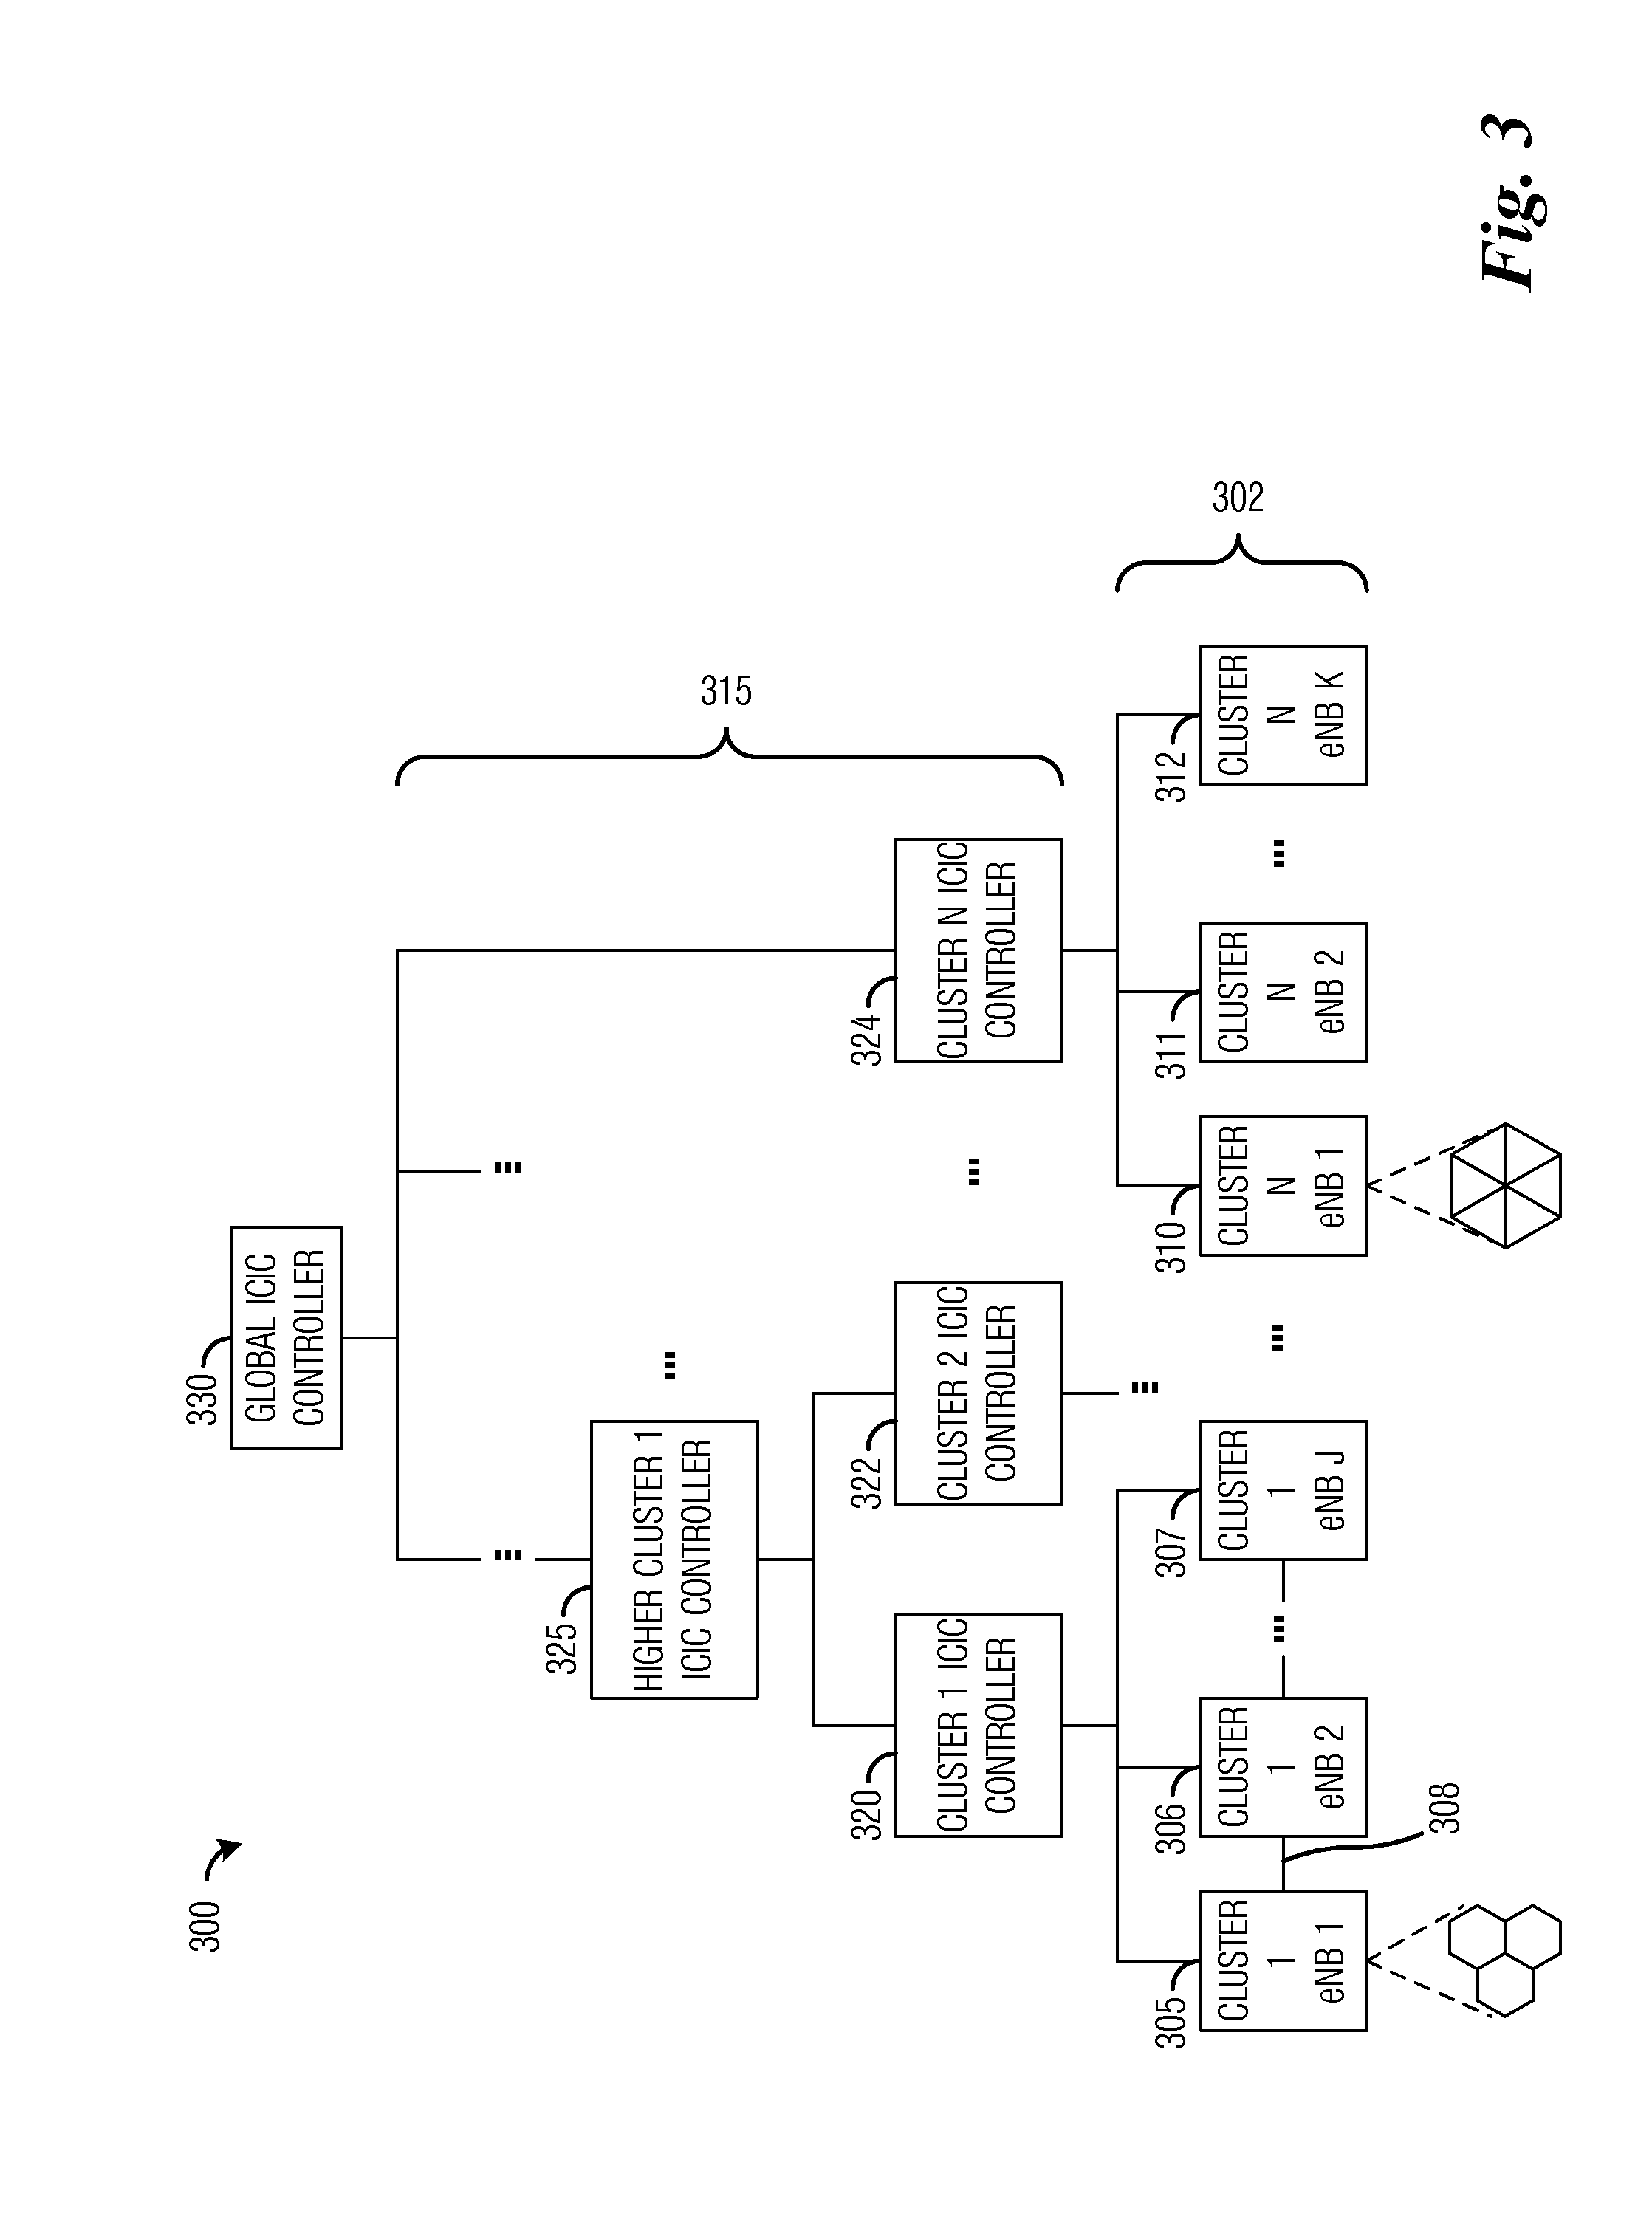 System and Method for Self-Organized Inter-Cell Interference Coordination